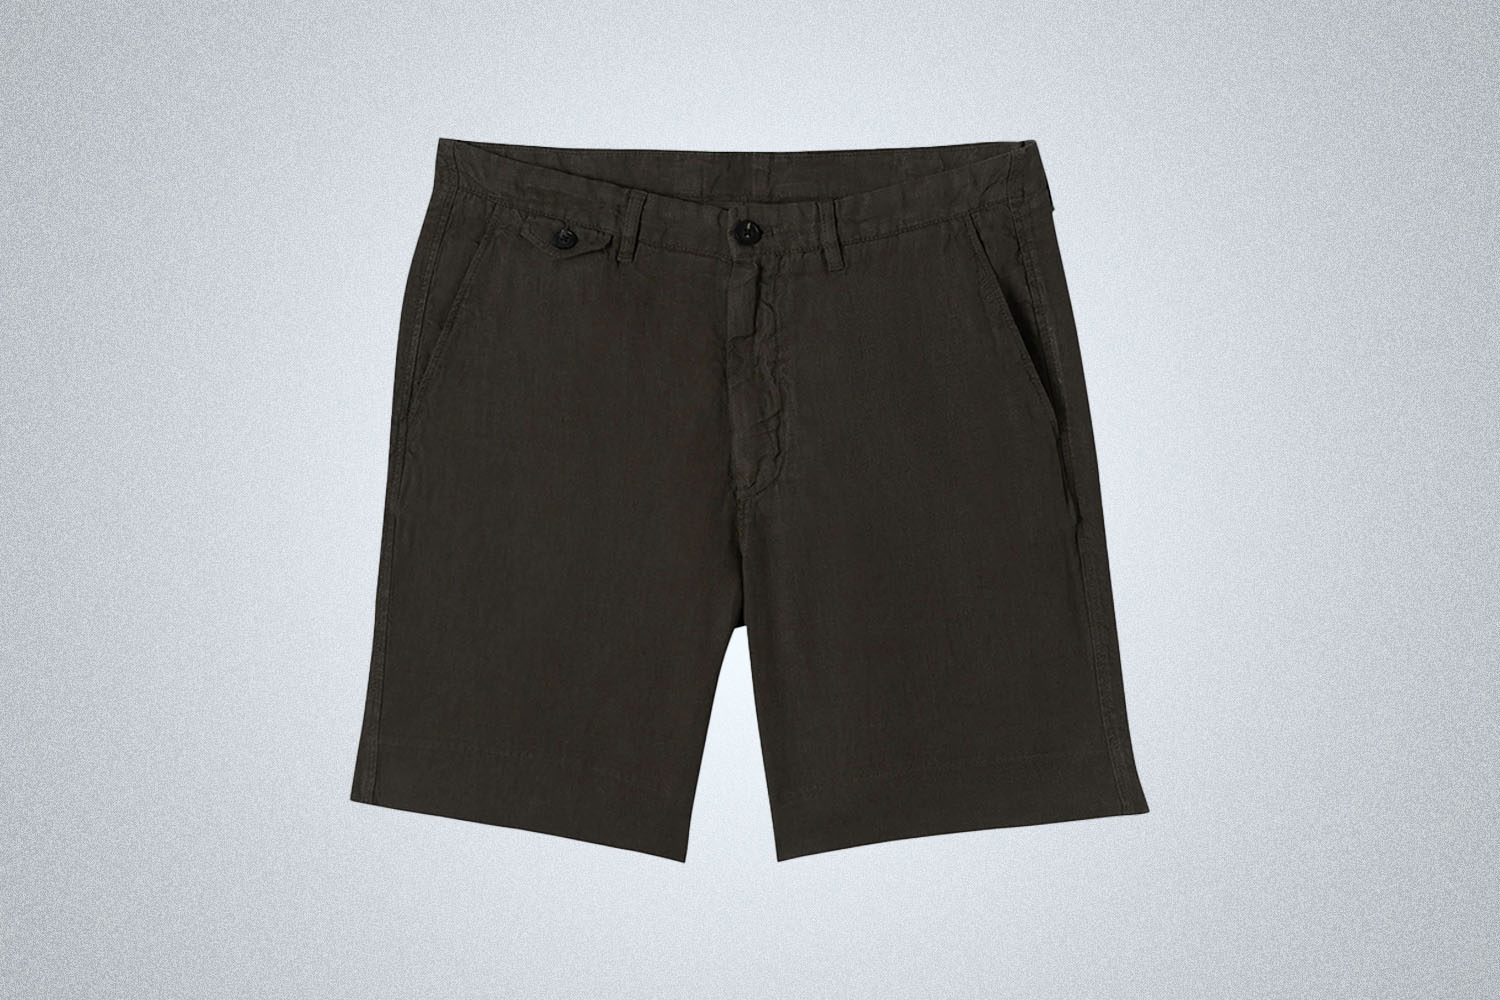 a pair of black linen shorts from Billy Reid on a grey background